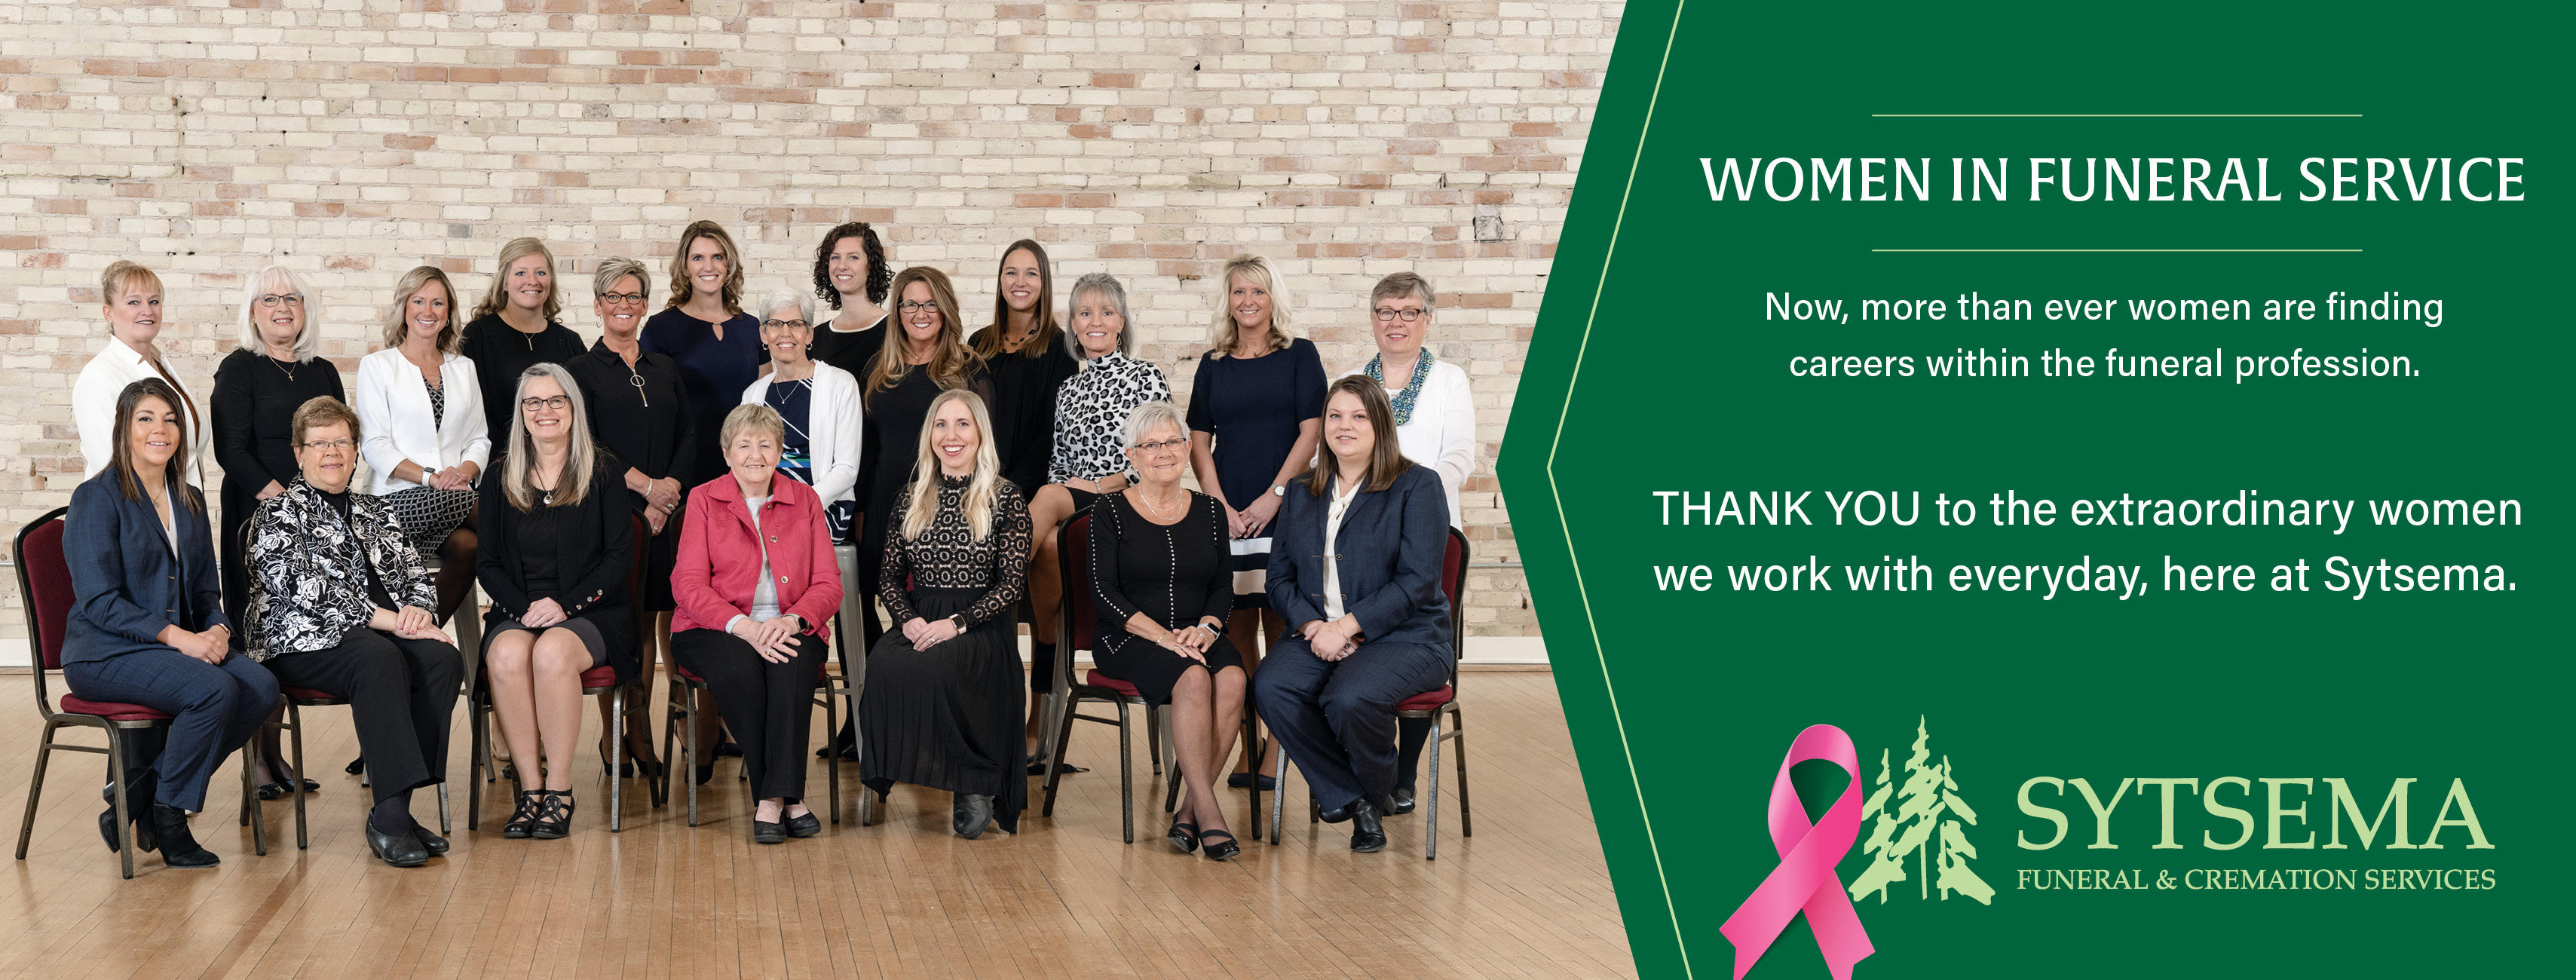 THANK YOU to the extraordinary women we work with everyday, here at Sytsema